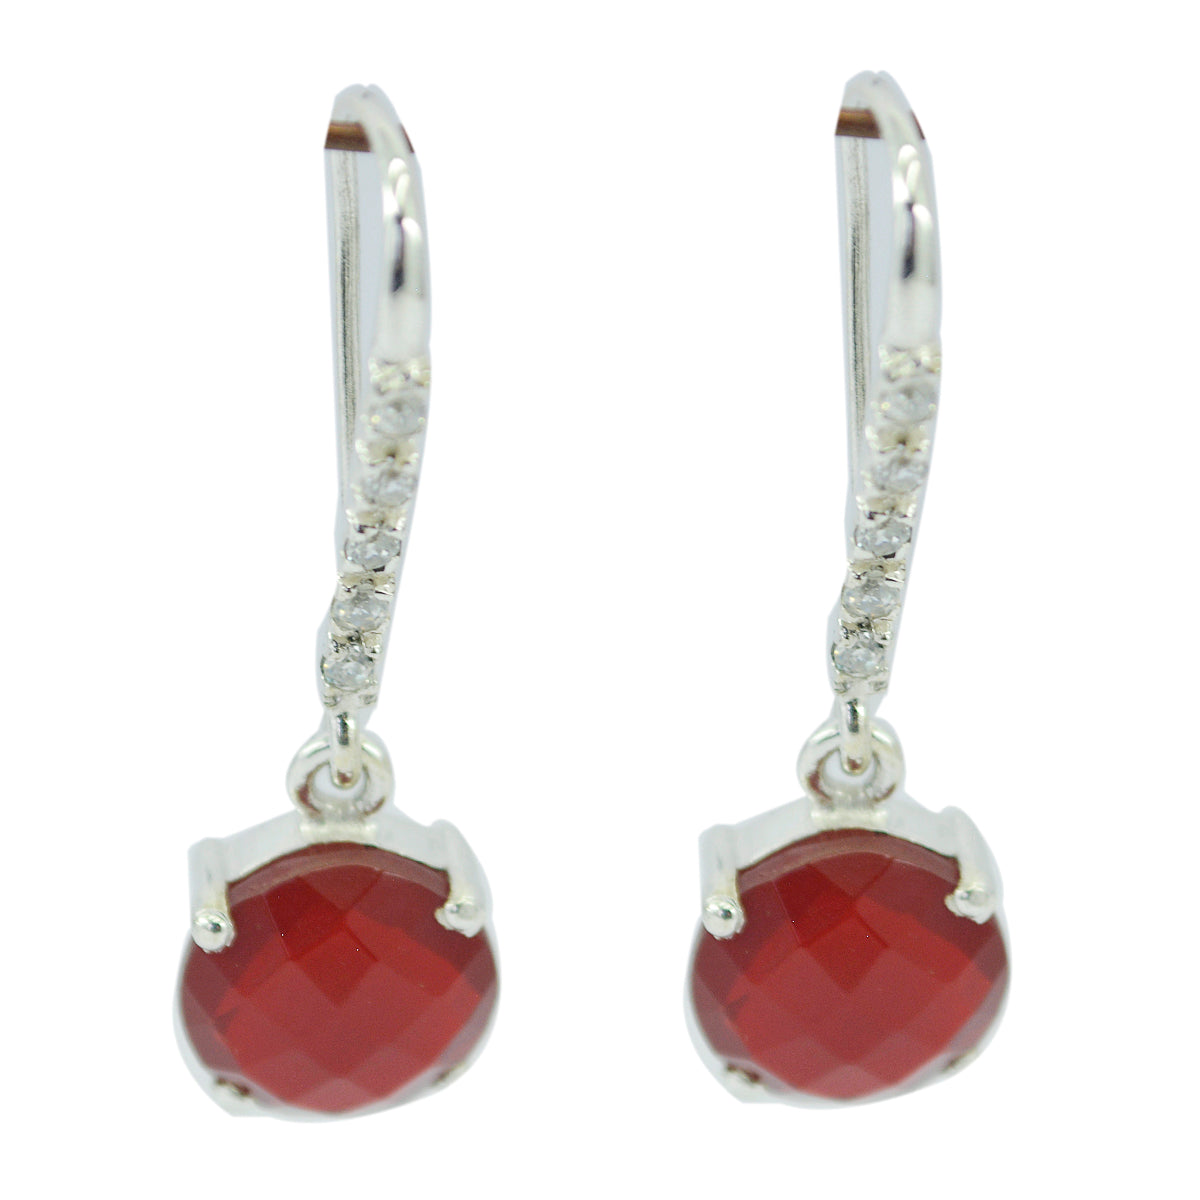 Riyo Real Gemstones round Faceted Red Onyx Silver Earring gift for halloween